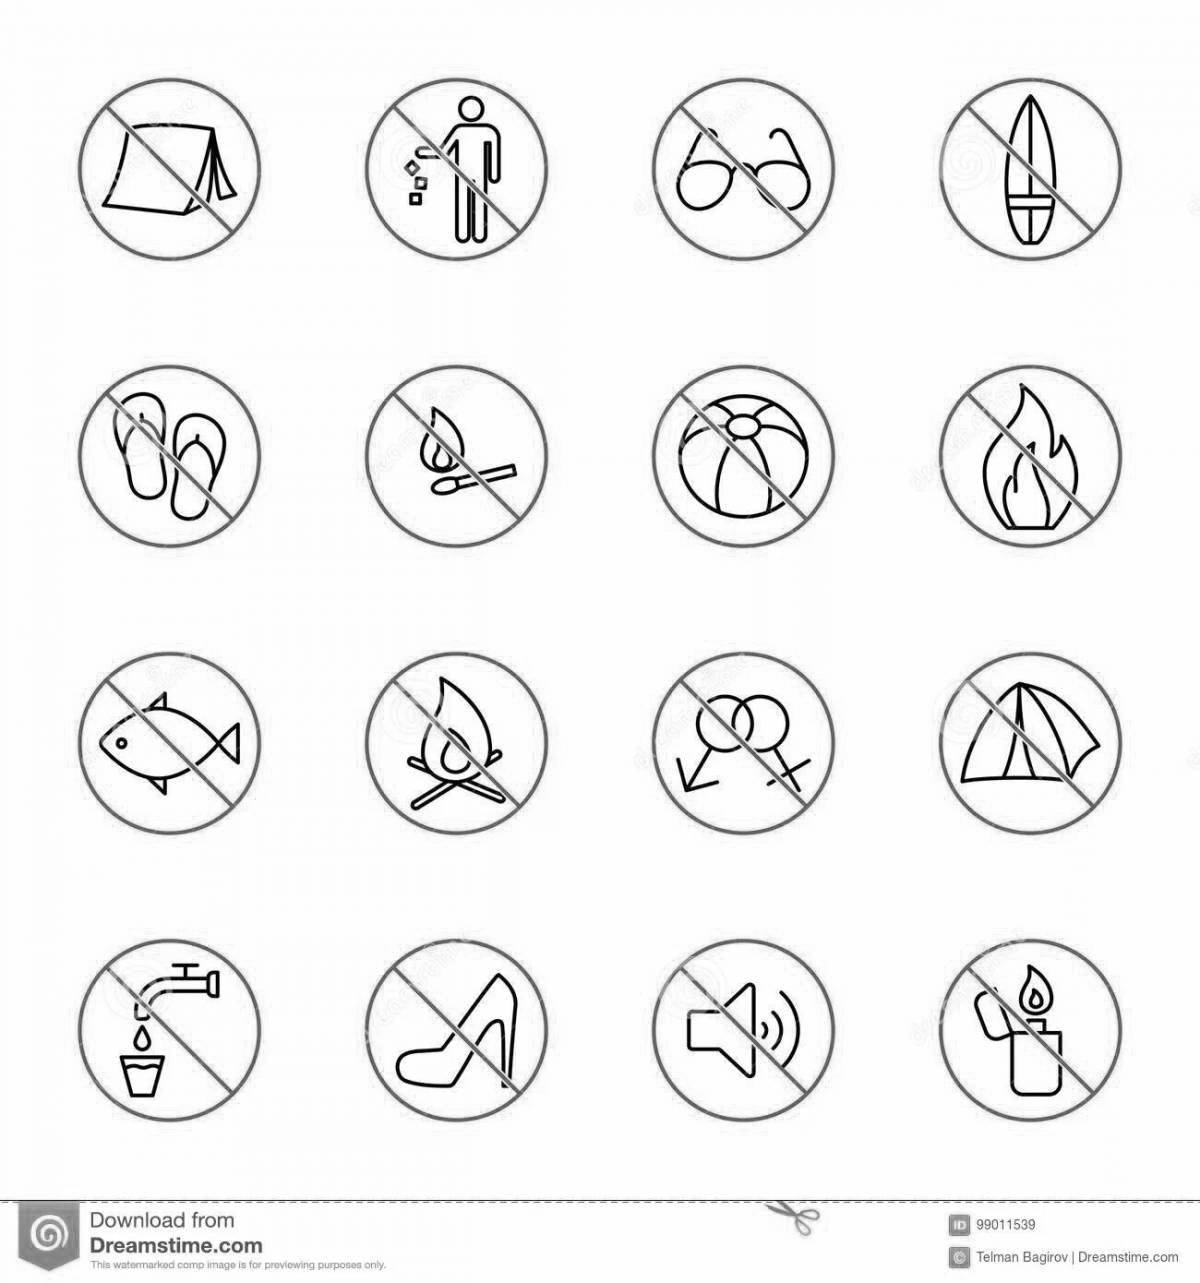 Attractive eco signs coloring pages for kids